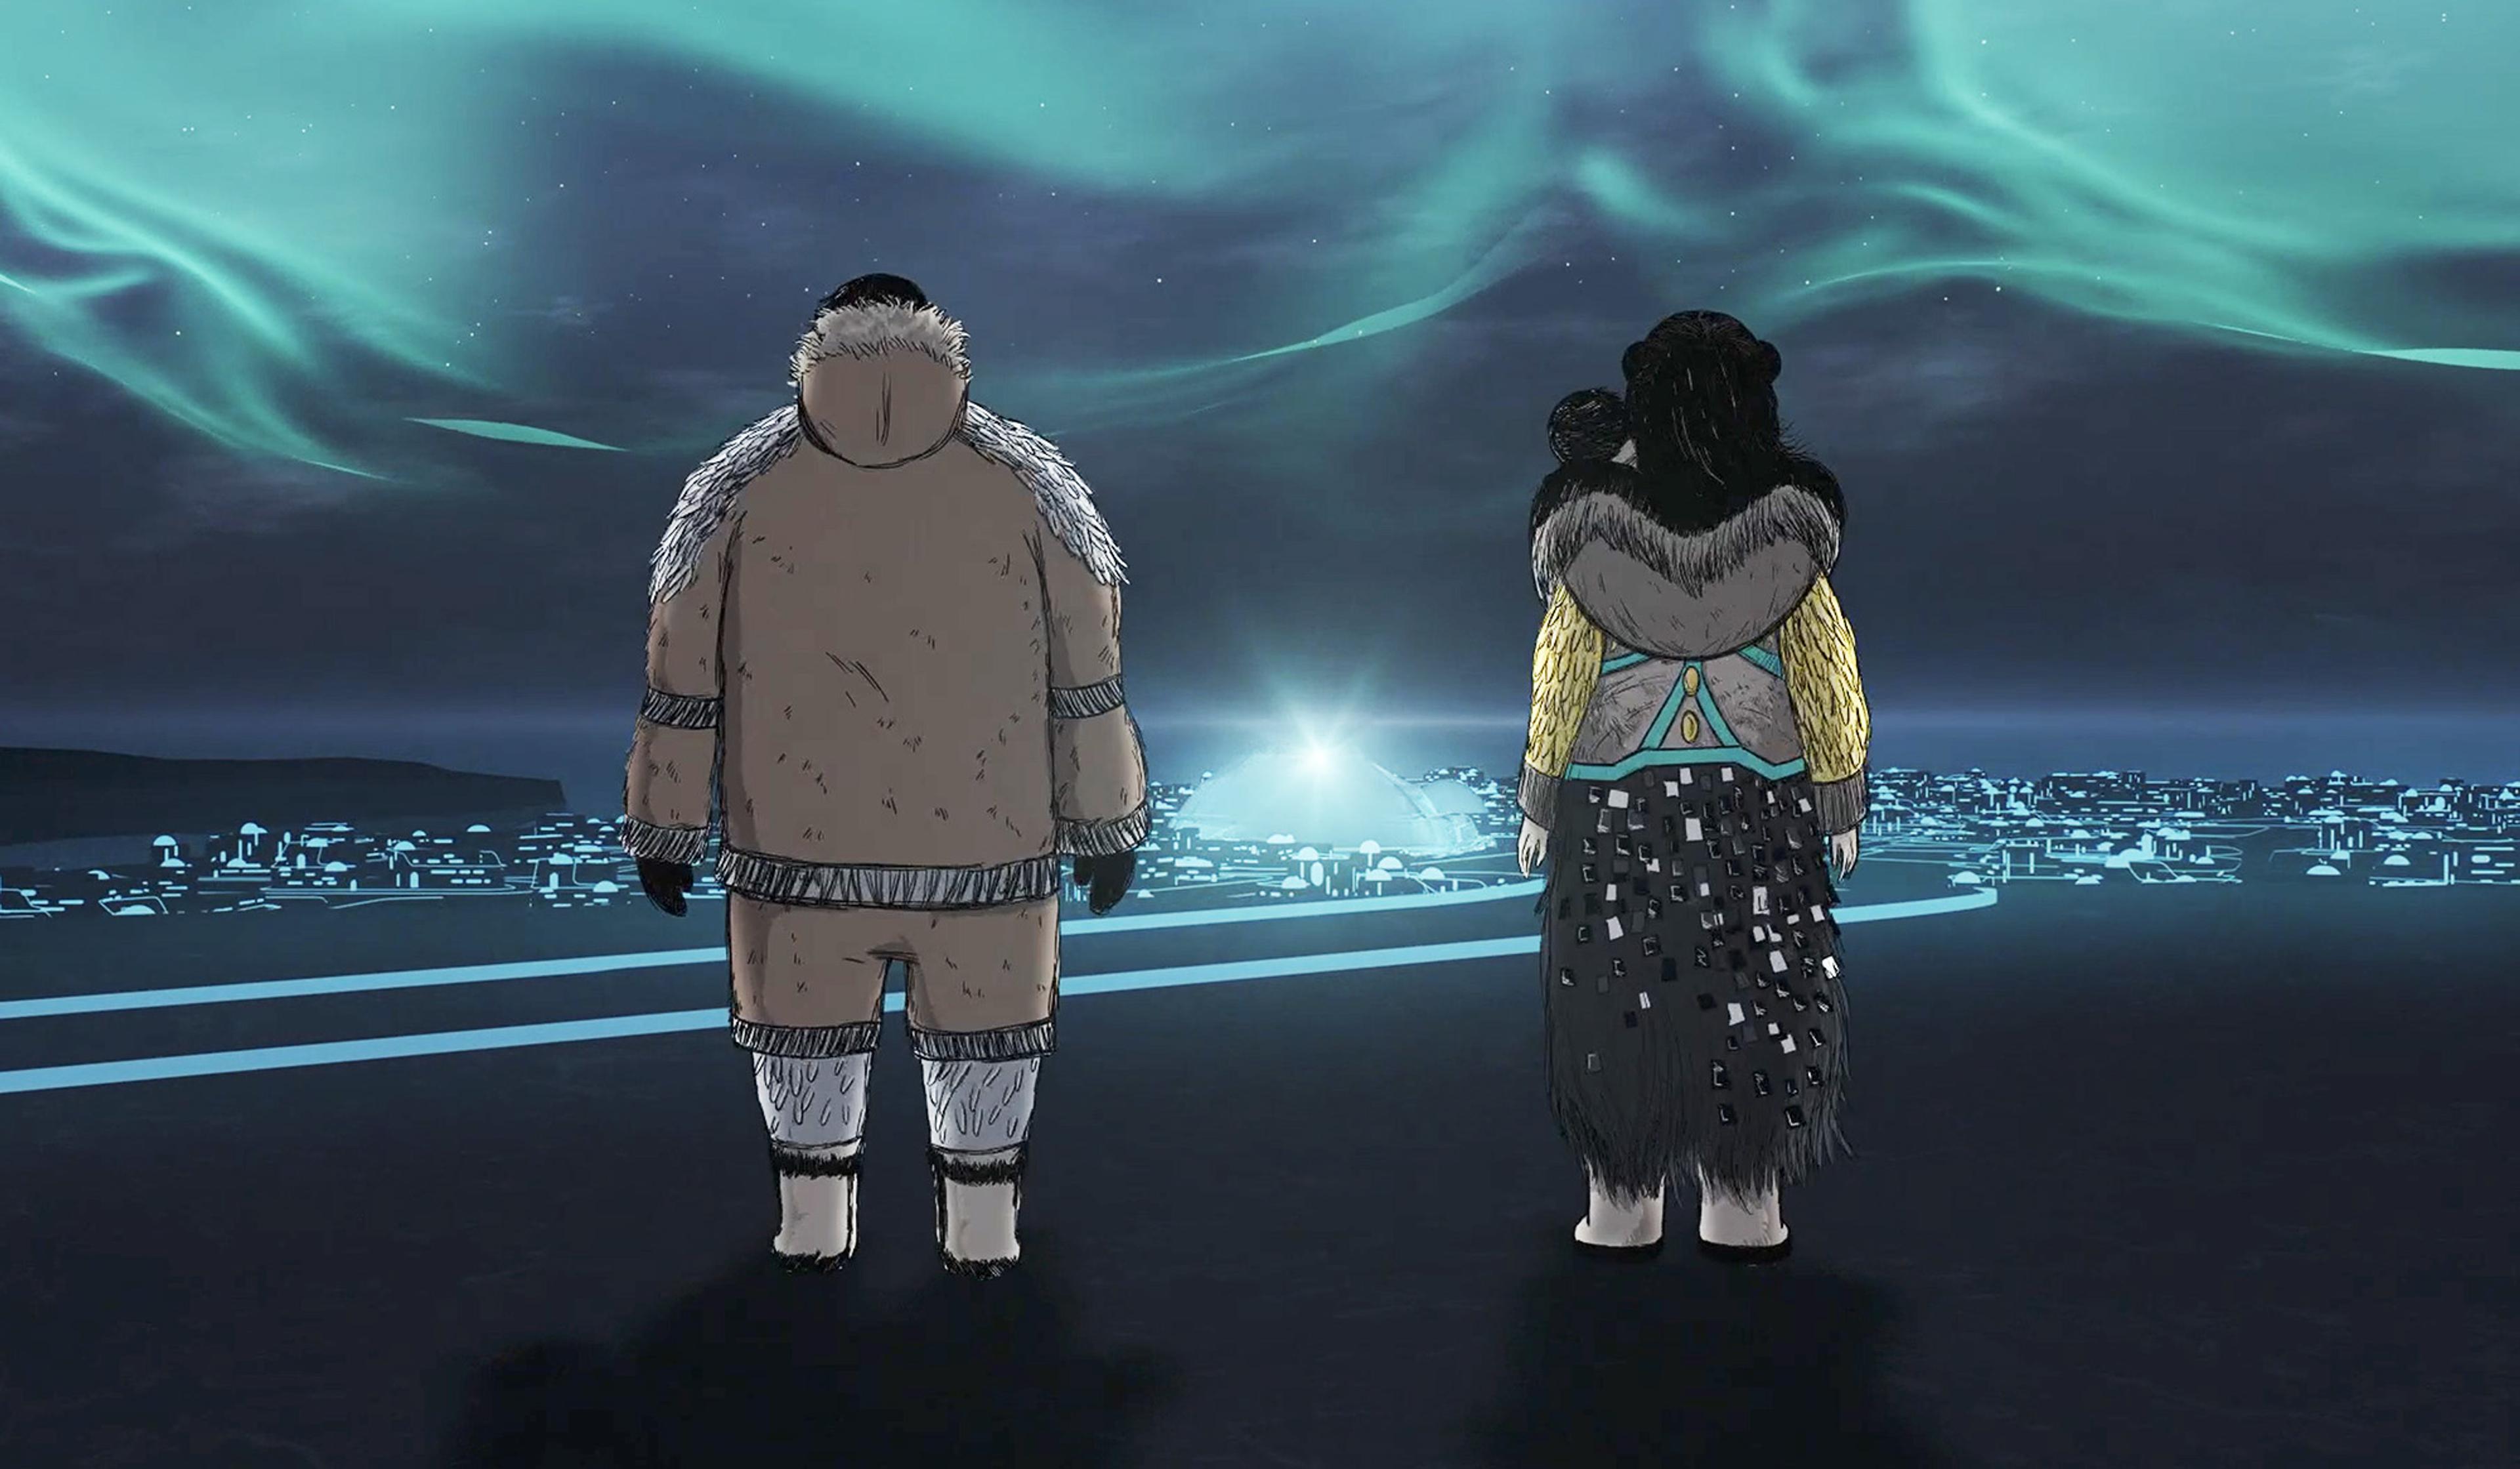 Two people in traditional Arctic clothing stand facing a futuristic city with glowing lights under the aurora borealis in the night sky.